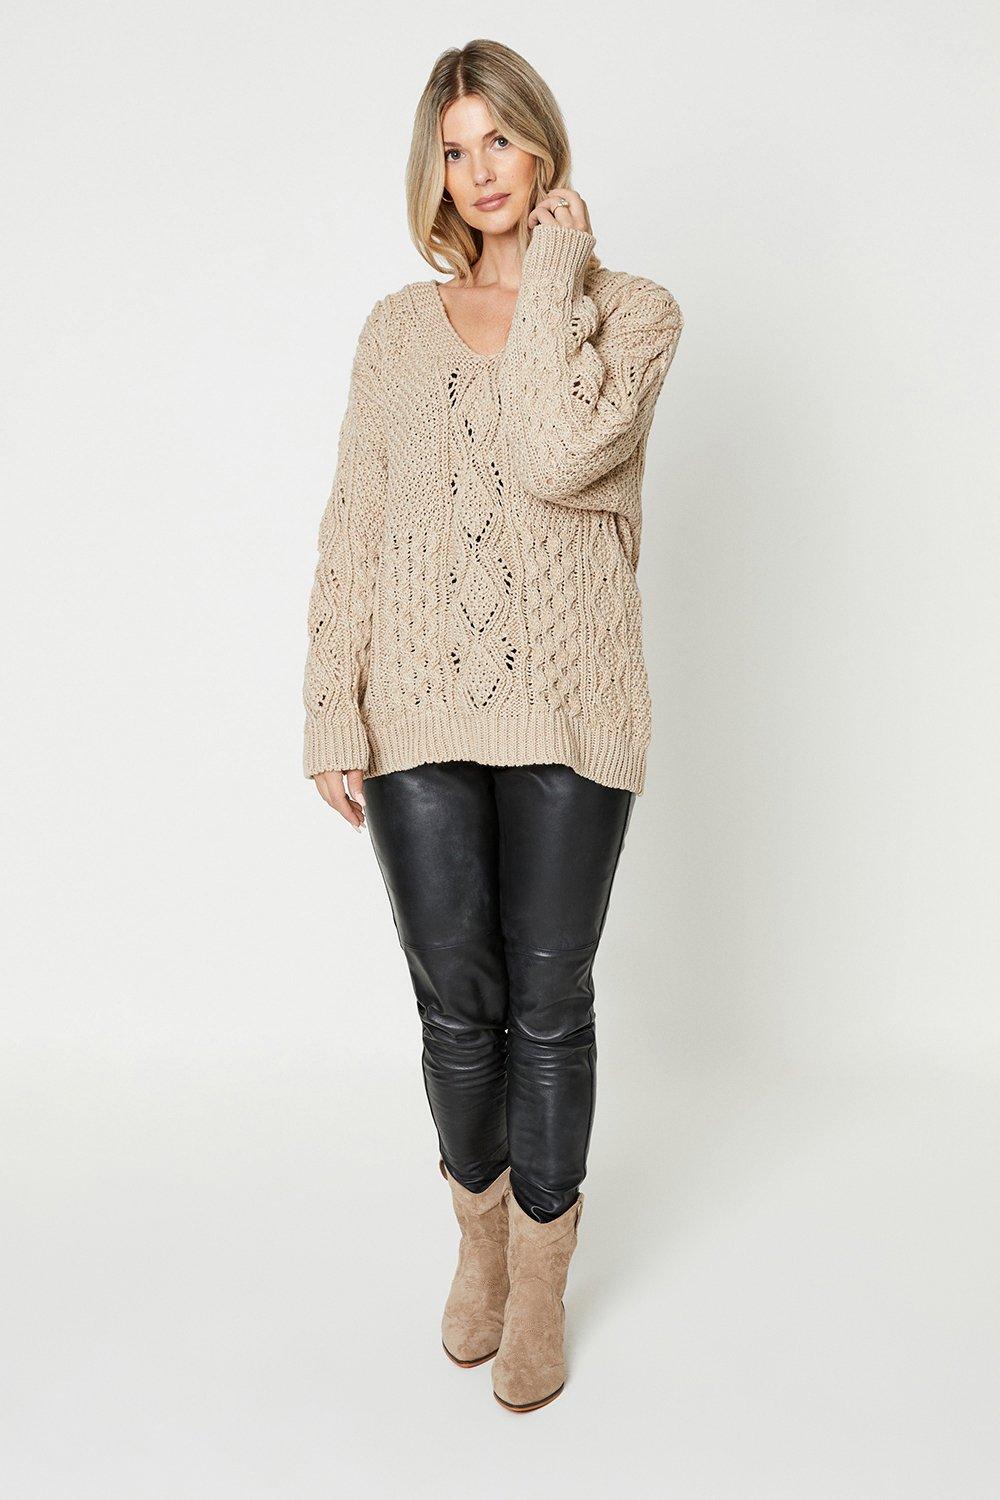 Women’s V Neck Cable Jumper - stone - XL